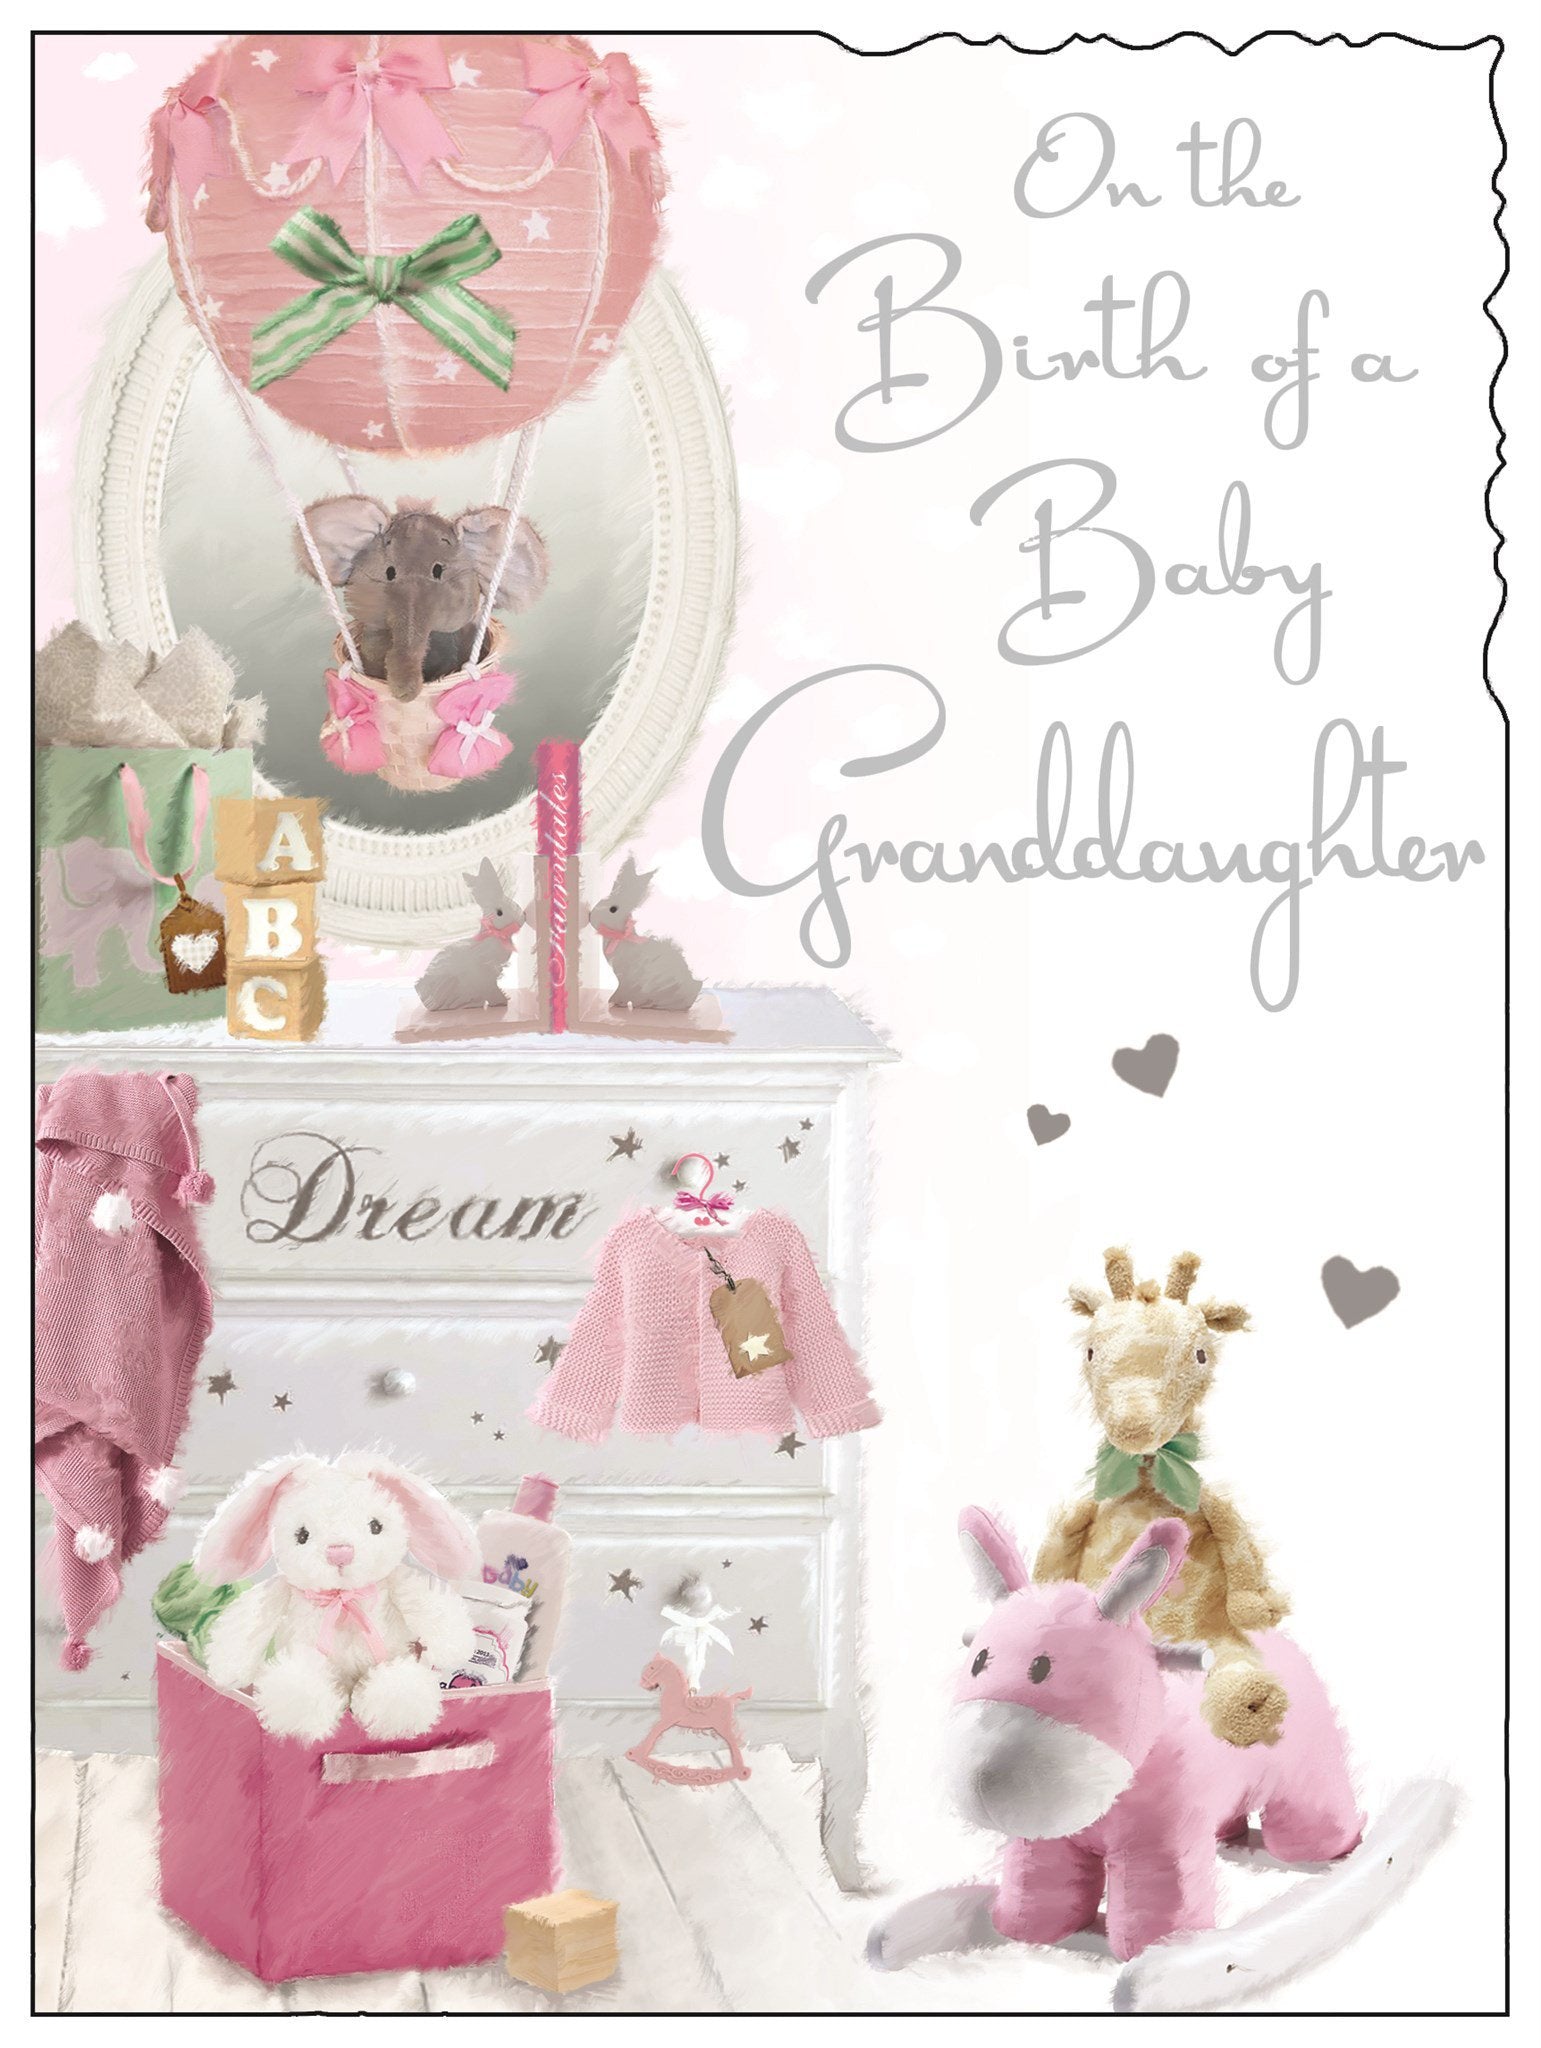 Front of Birth of Baby Granddaughter Greetings Card